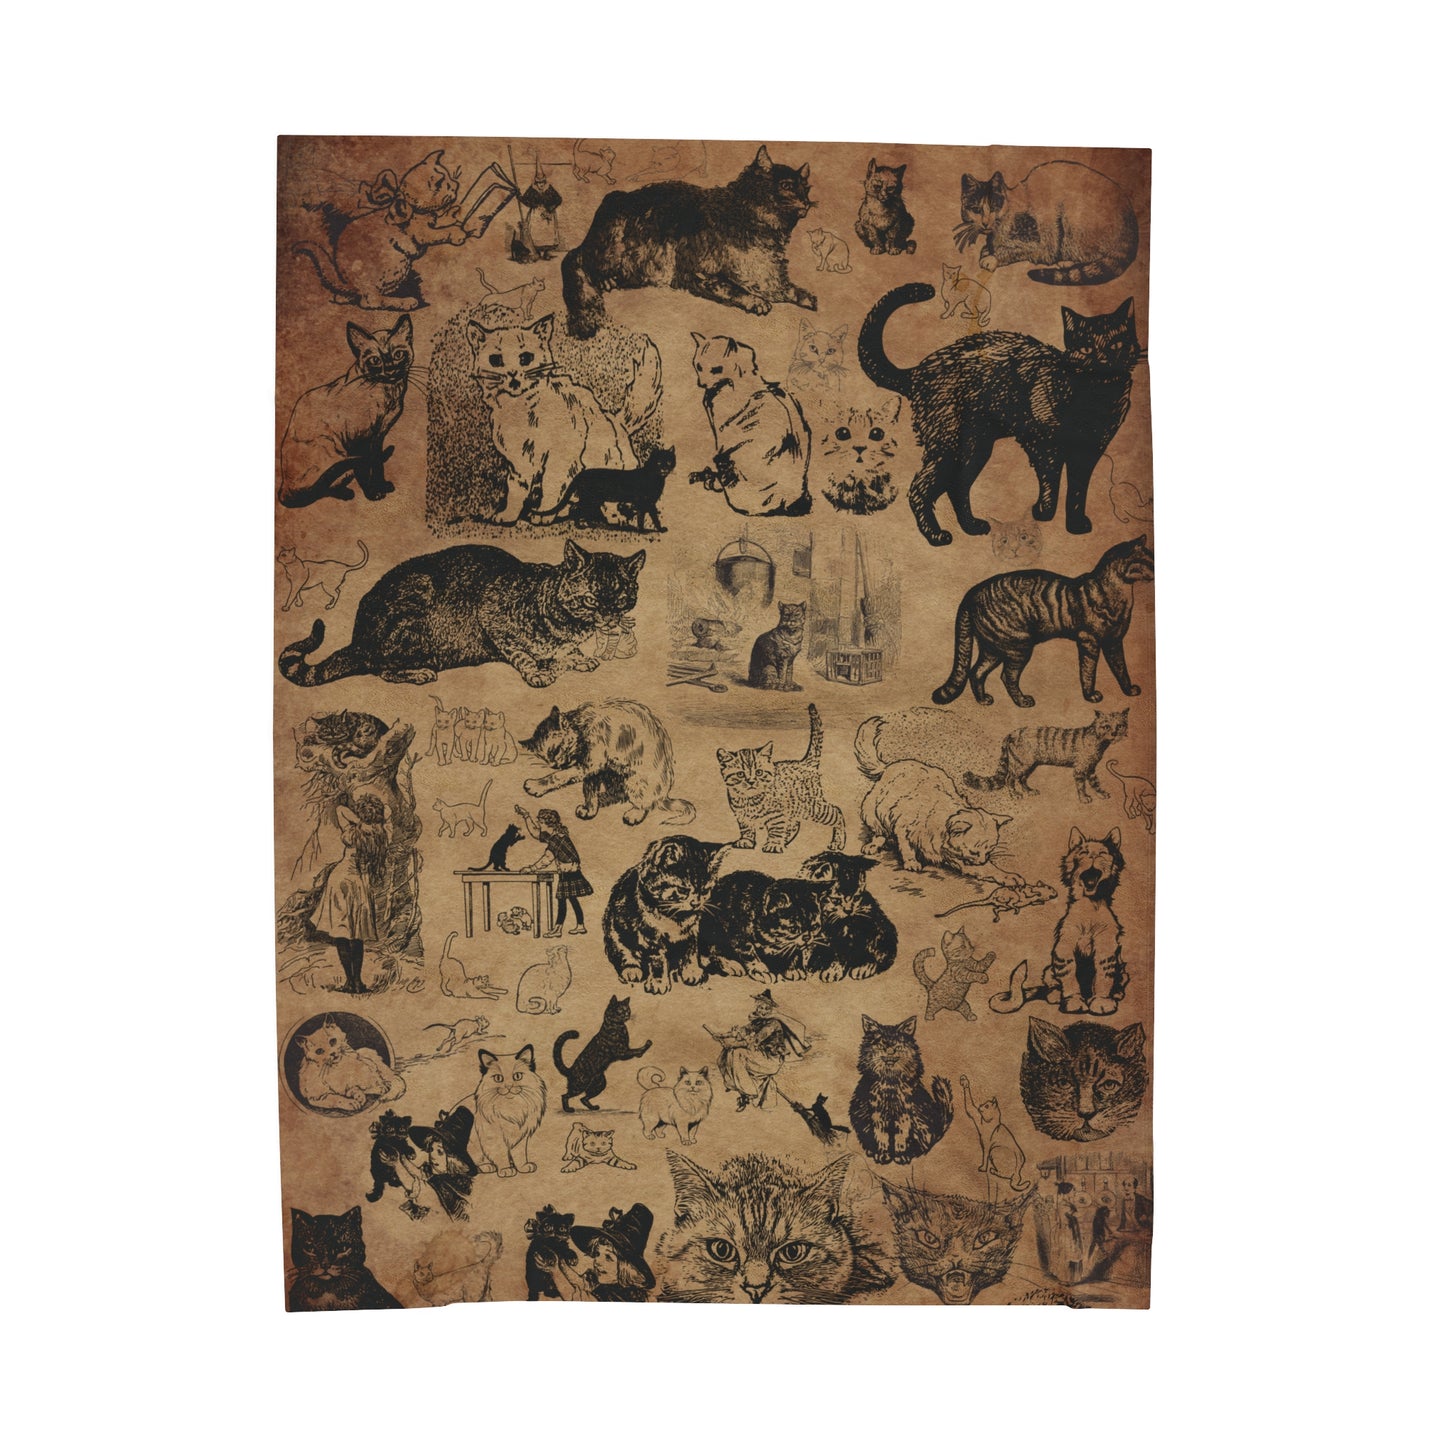 Beautiful Cats Blanket vintage look cats throw funny cats gift stray cats Reddit cats cat whisperer bengal cat Persian cat momma cat lady